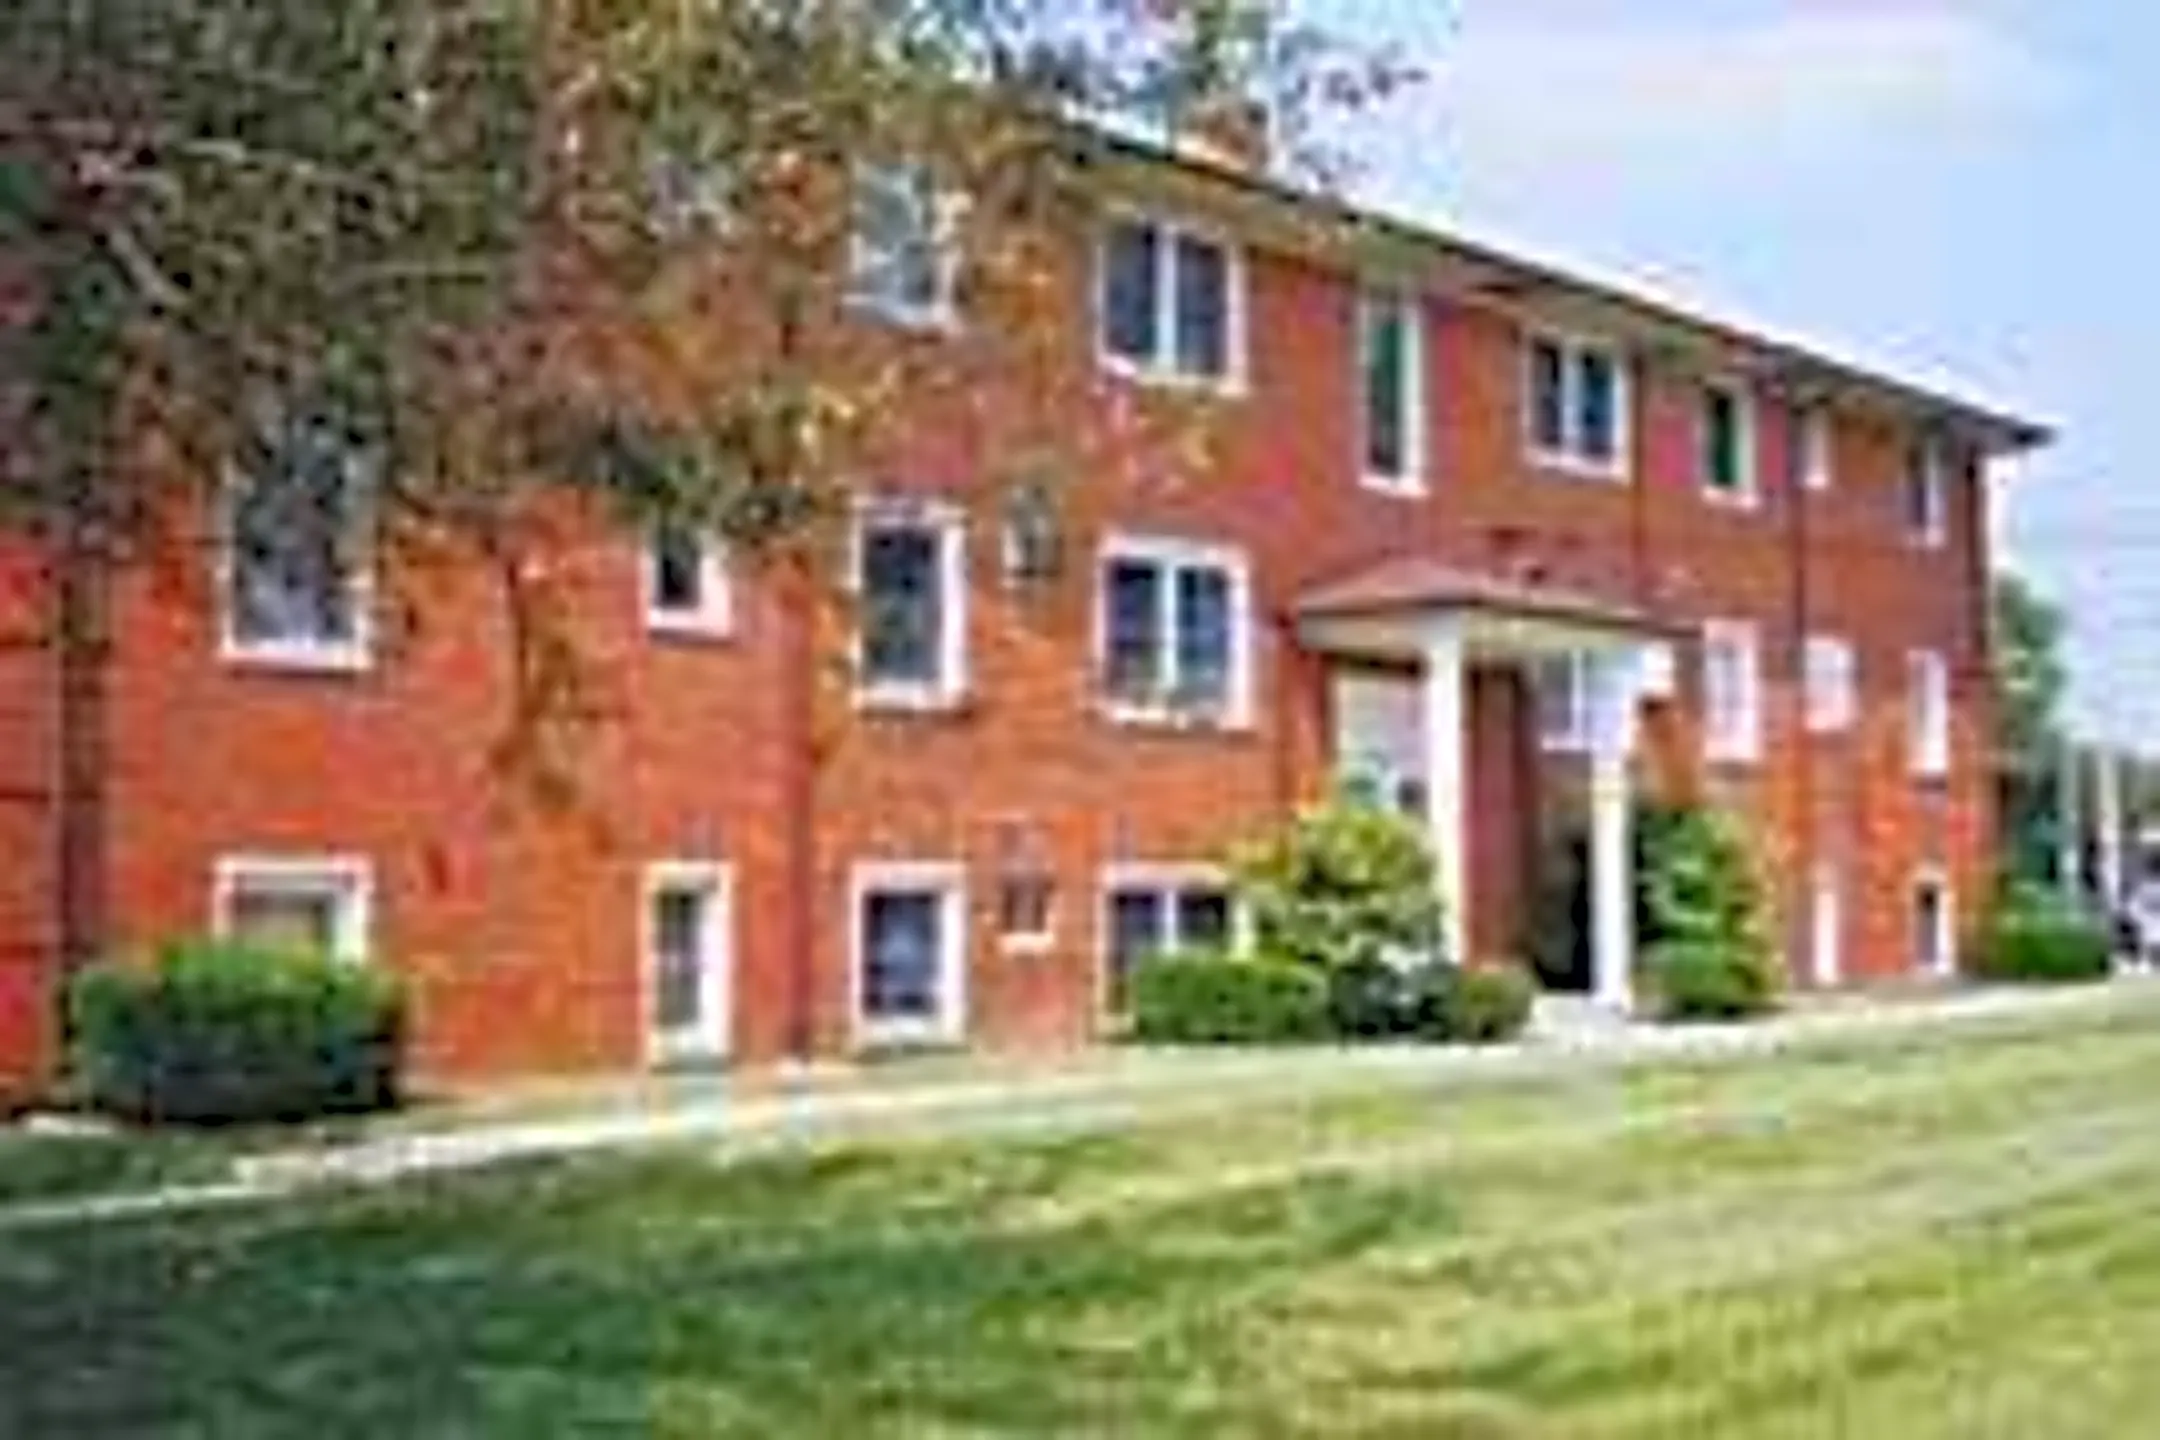 Building - Rosedale Hills Apartments - Indianapolis, IN